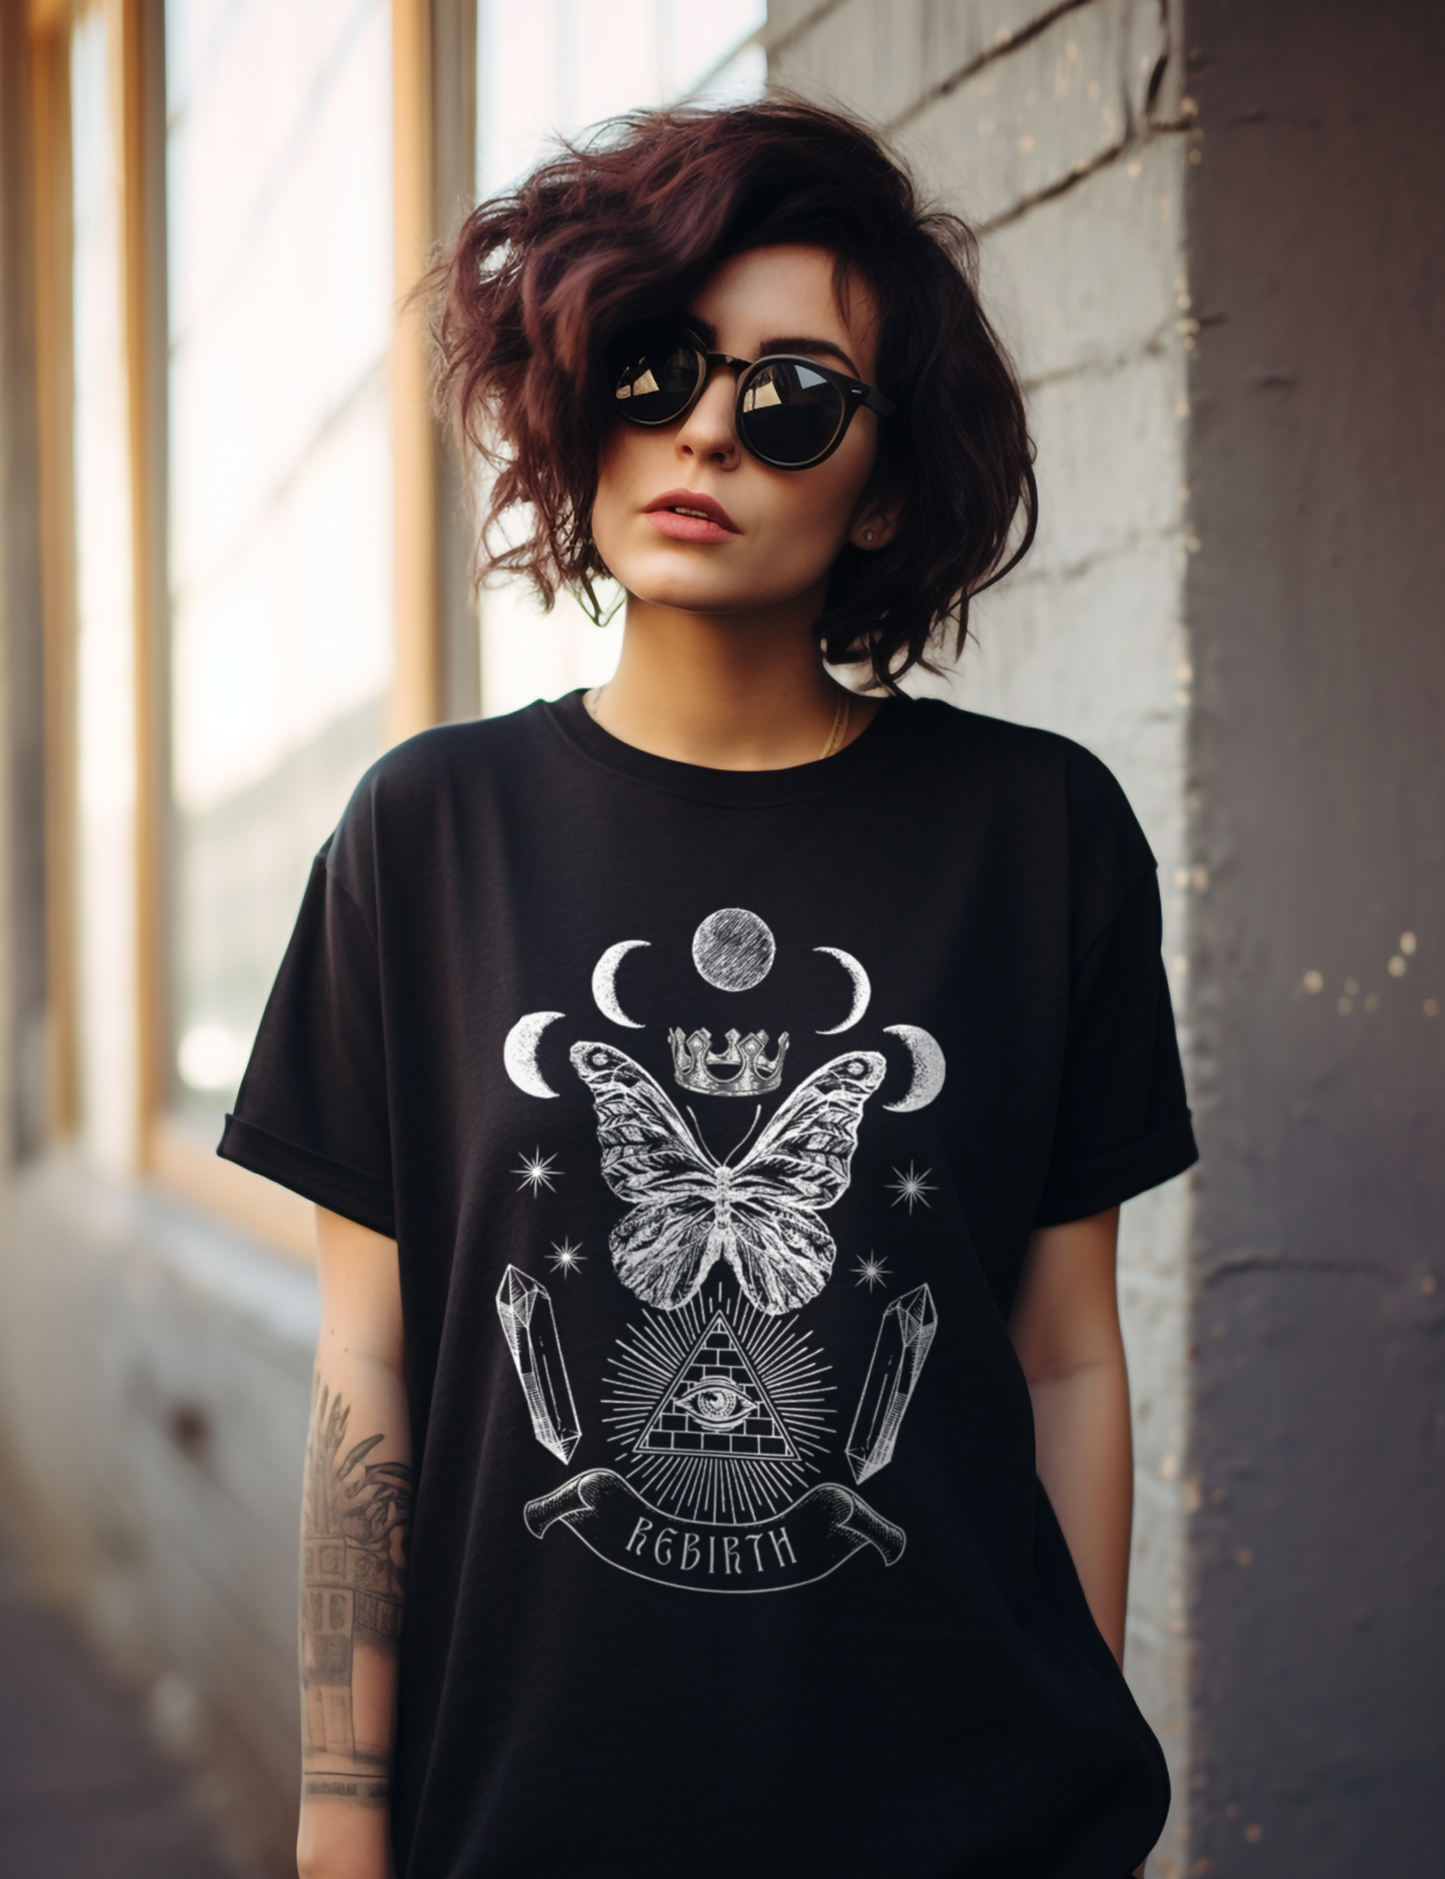 Rebirth Goth Butterly Mystical Alchemy Plus Size Witchy Clothing Shirt